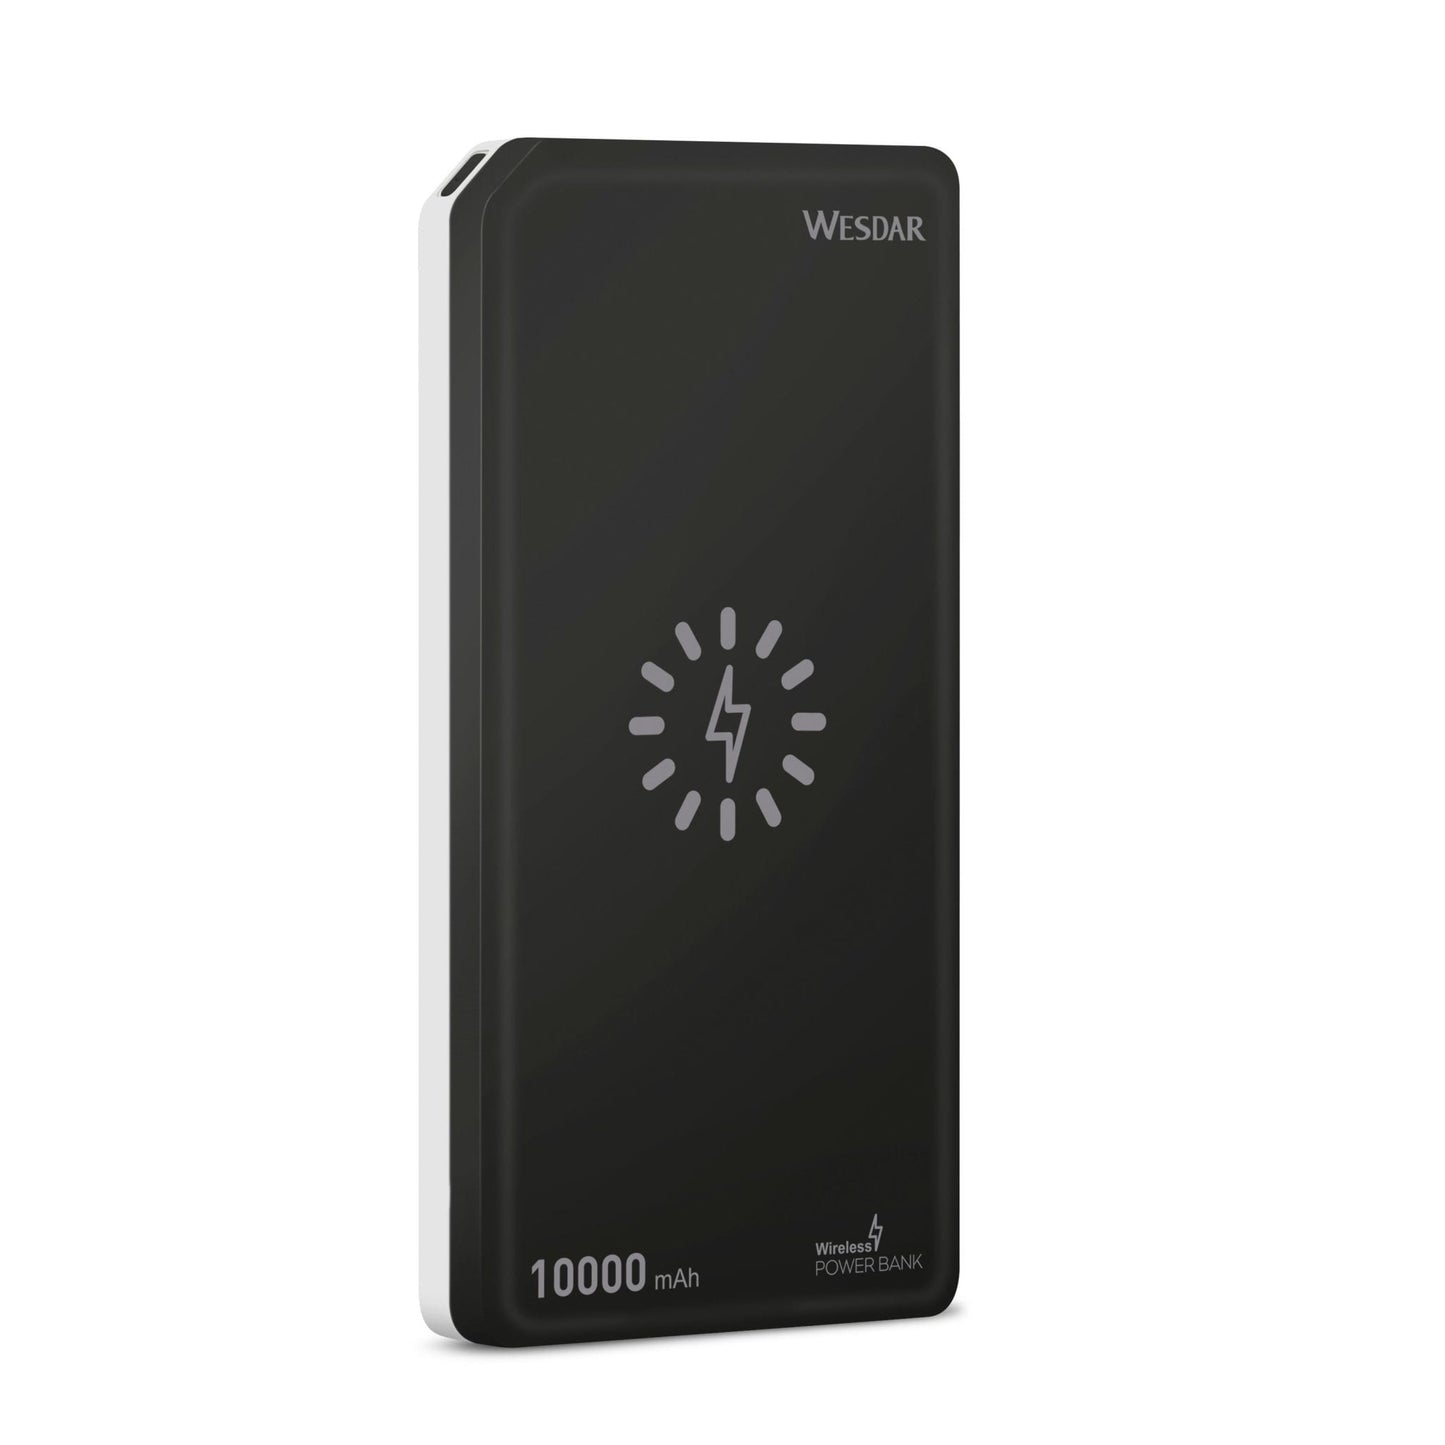 POWER BANK WS1 WESDAR